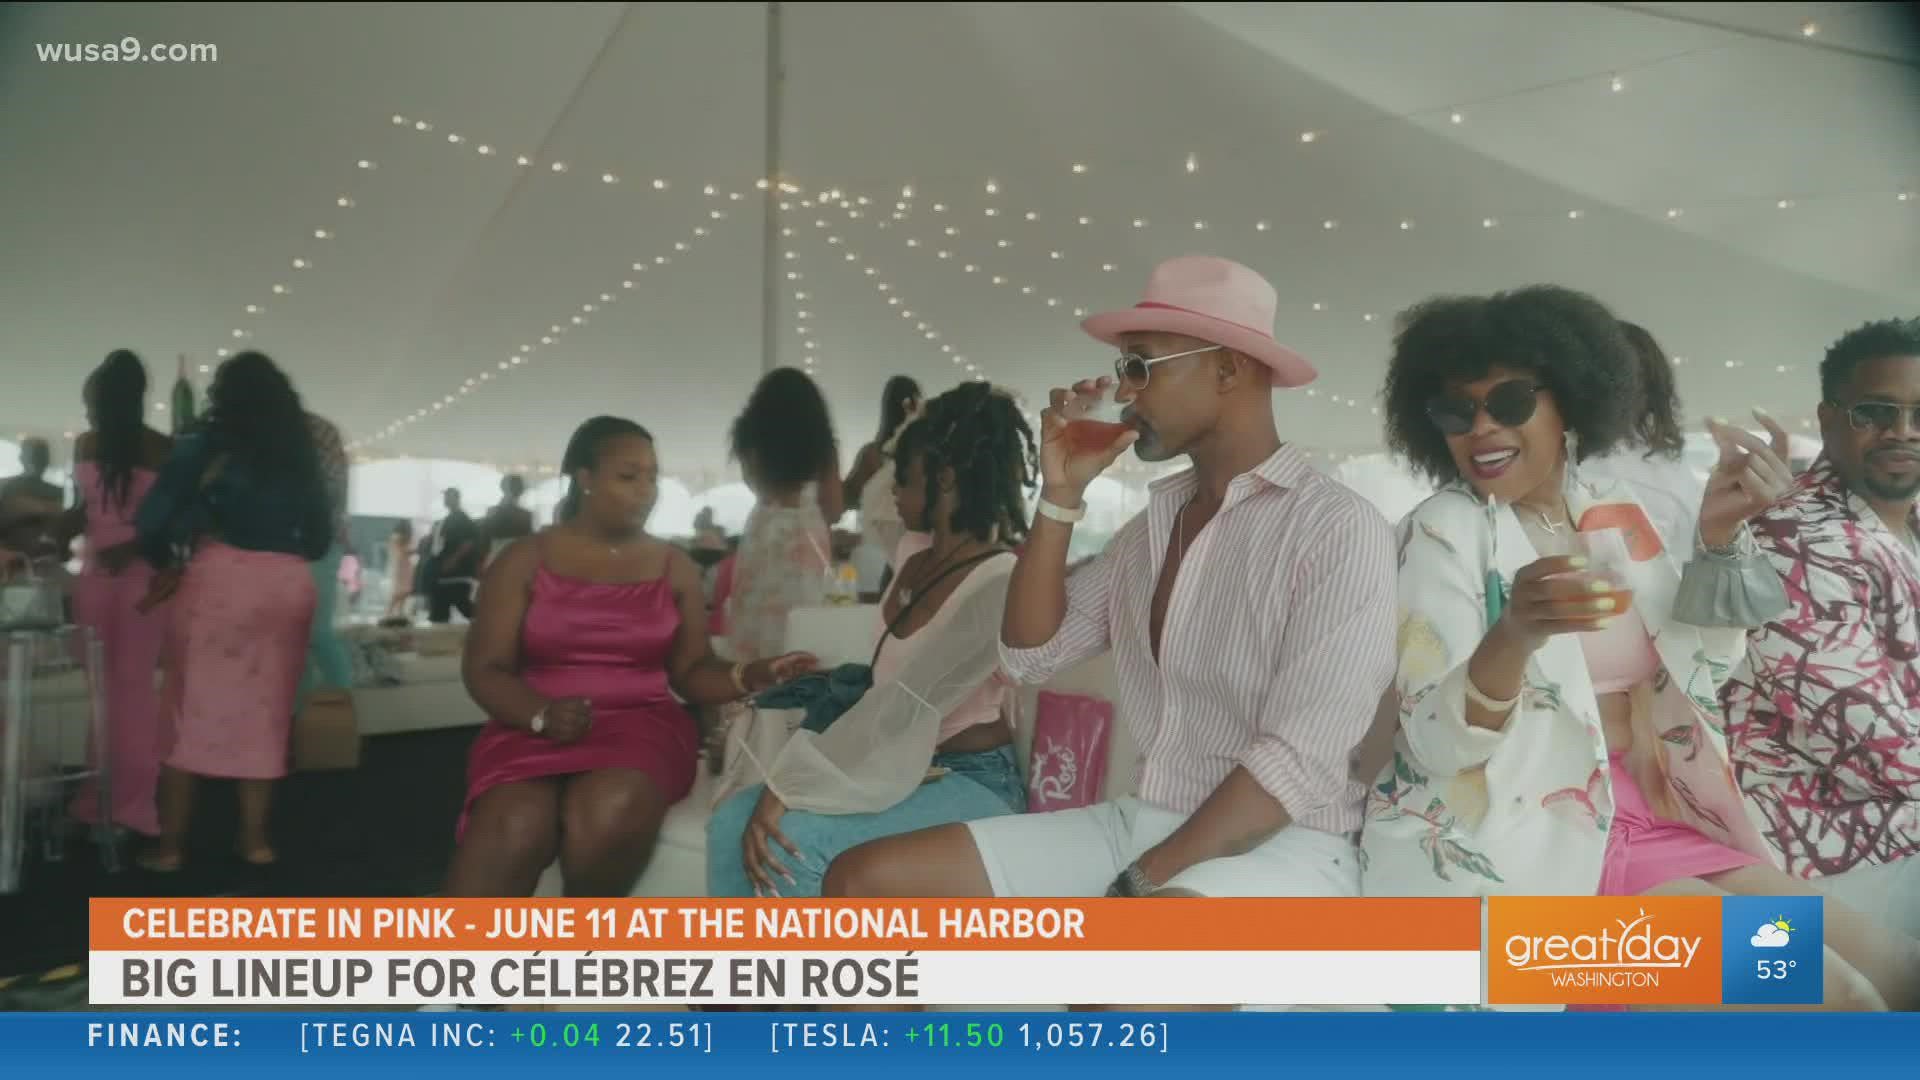 With a lineup of Robin Thicke, Tamia, Mya and more, Célébrez en Rosé brings a wine & music festival to the DMV. Festival Founder Cleveland Spears shares details.